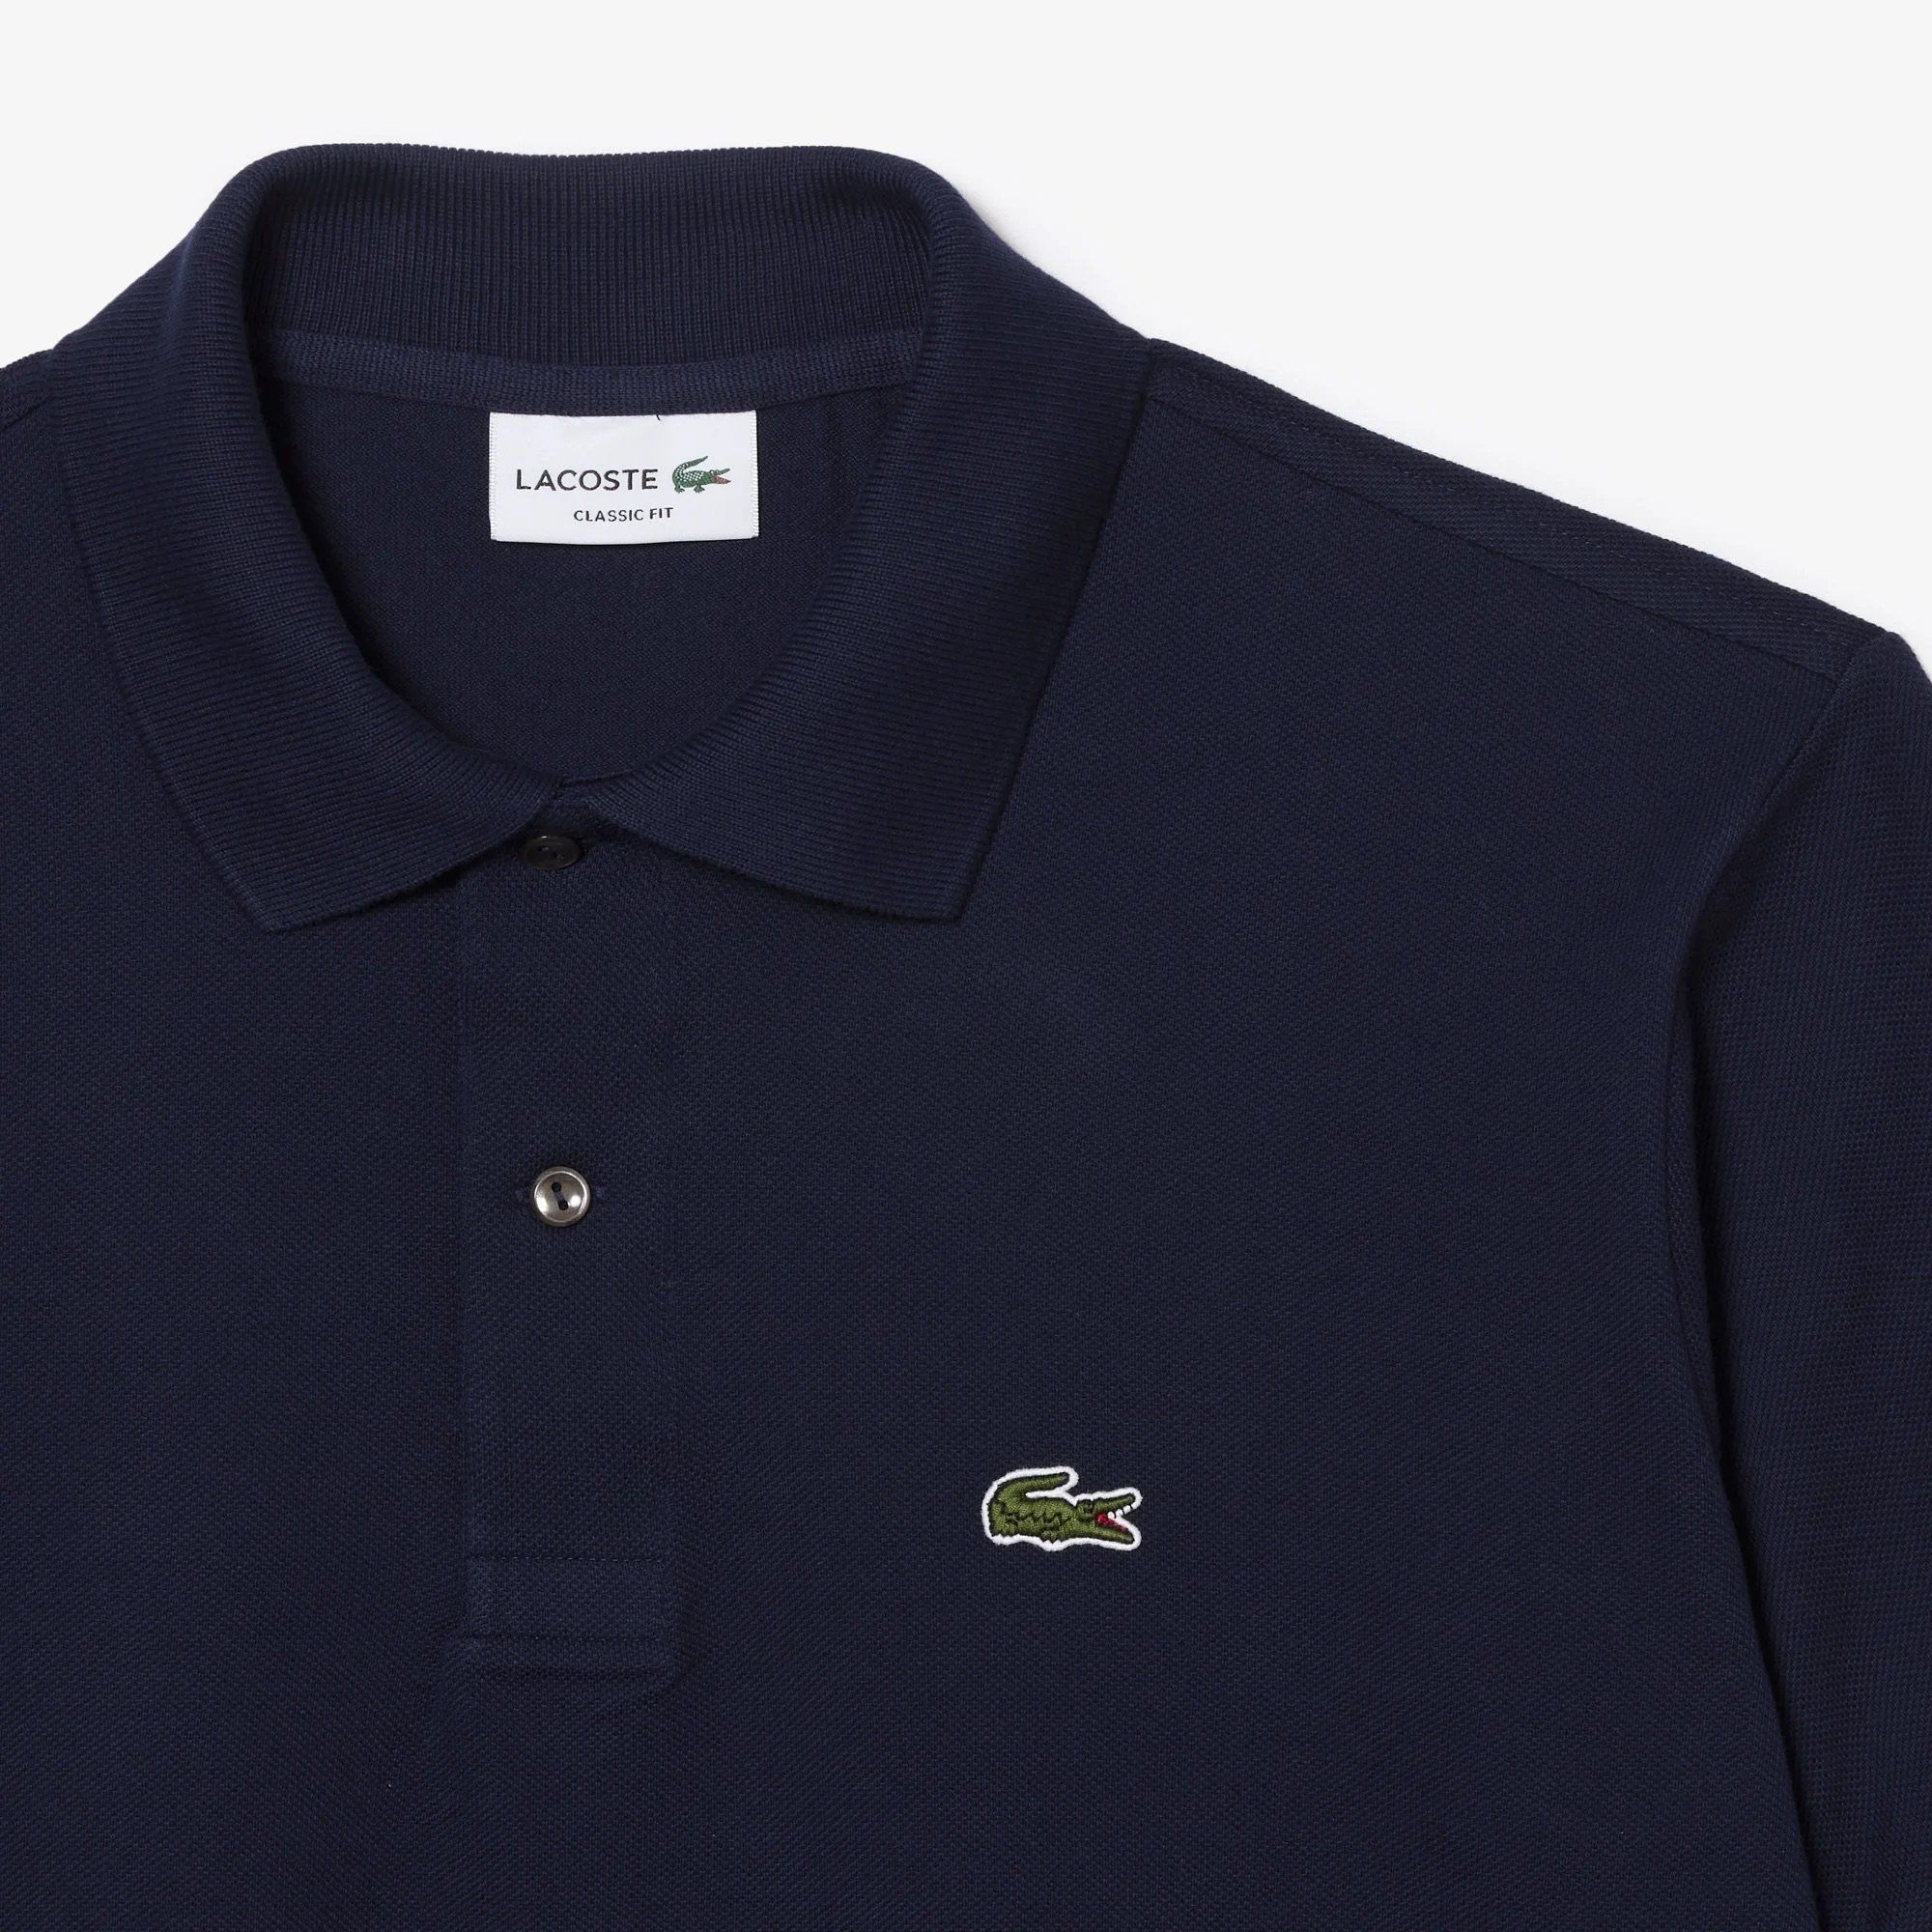  Lacoste Classic Fit L.12.12 Polo Shirt - Navy Blue 